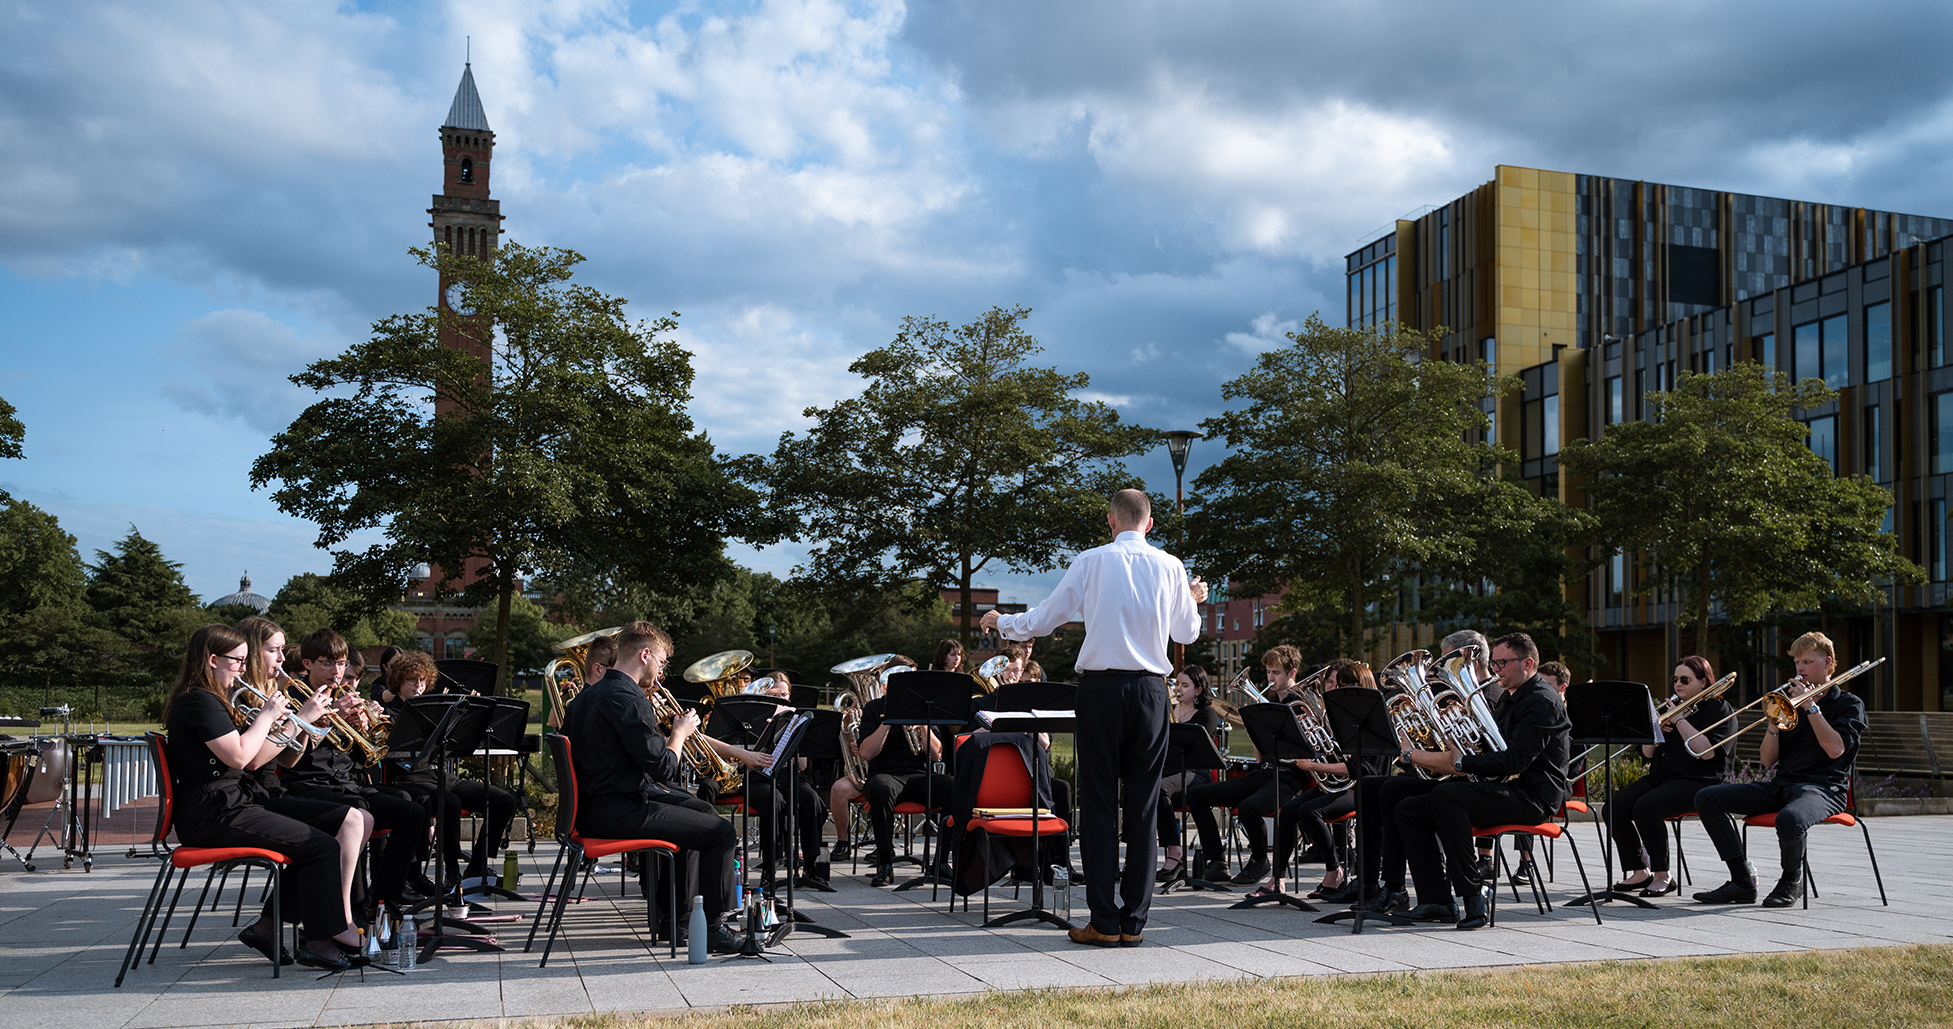 Members of the brass band performing outdoors with University of Birmingham buildings in the background